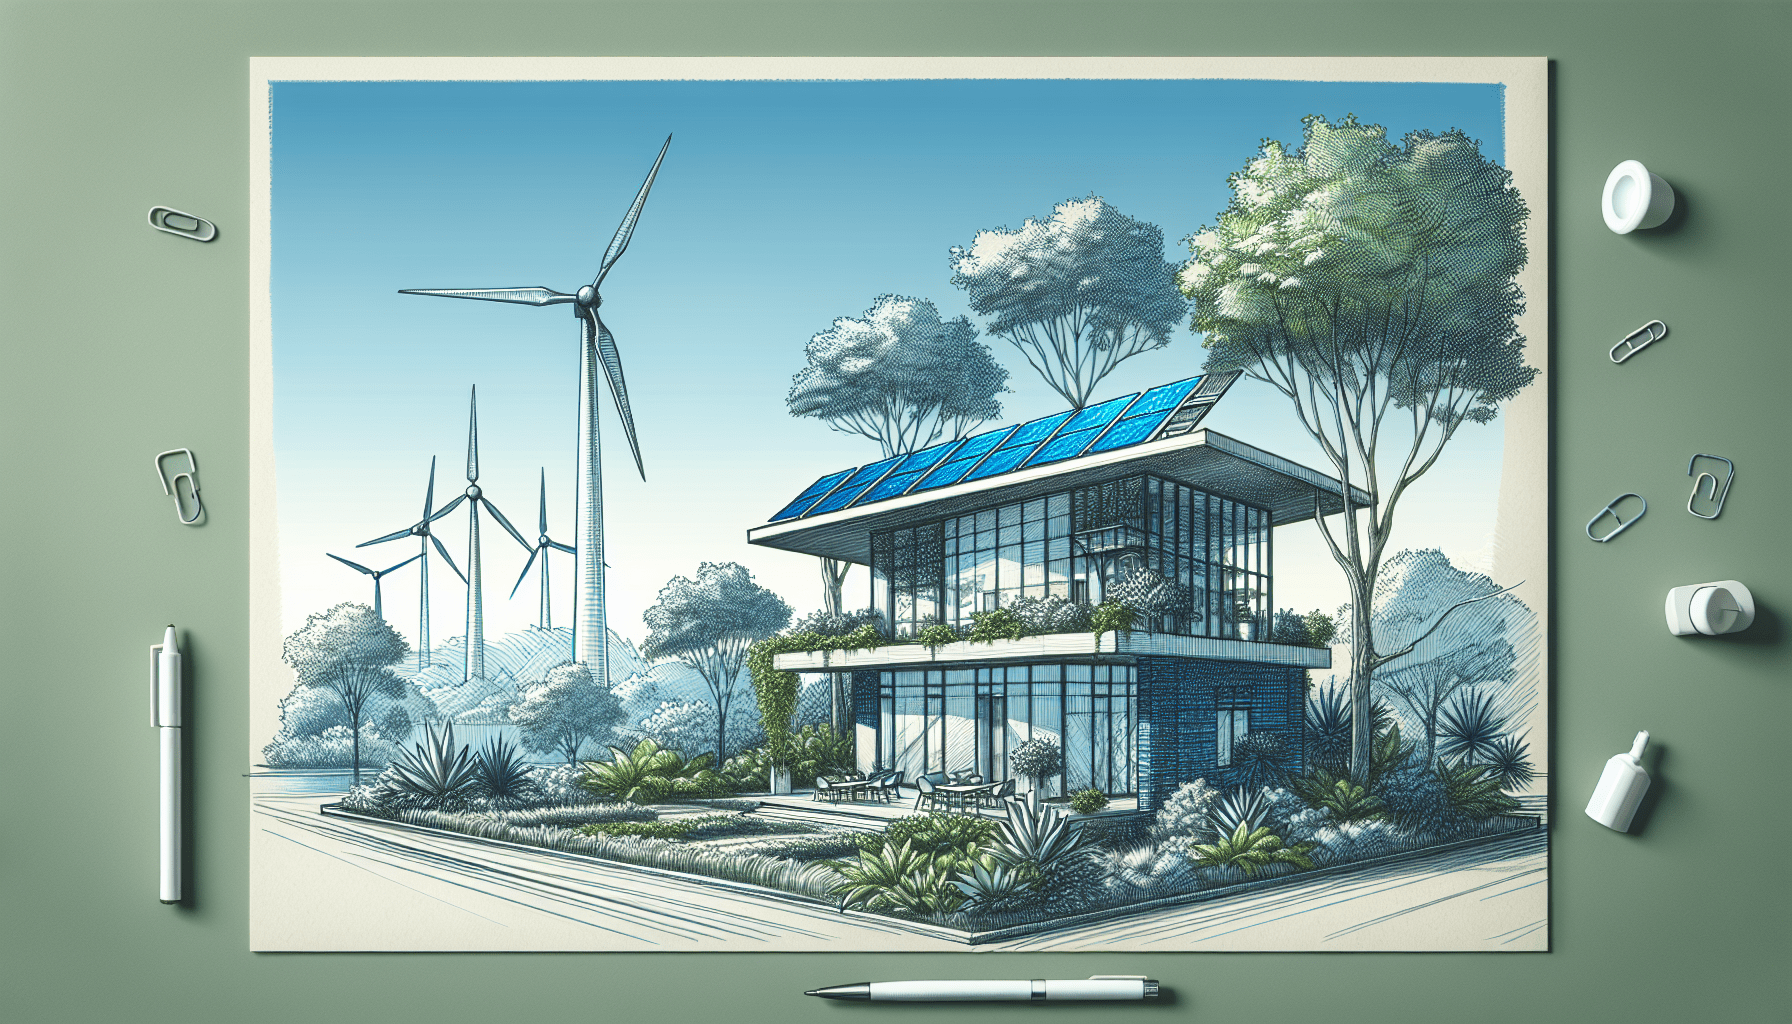 How Do You Integrate Renewable Energy Systems Into Sustainable Buildings?